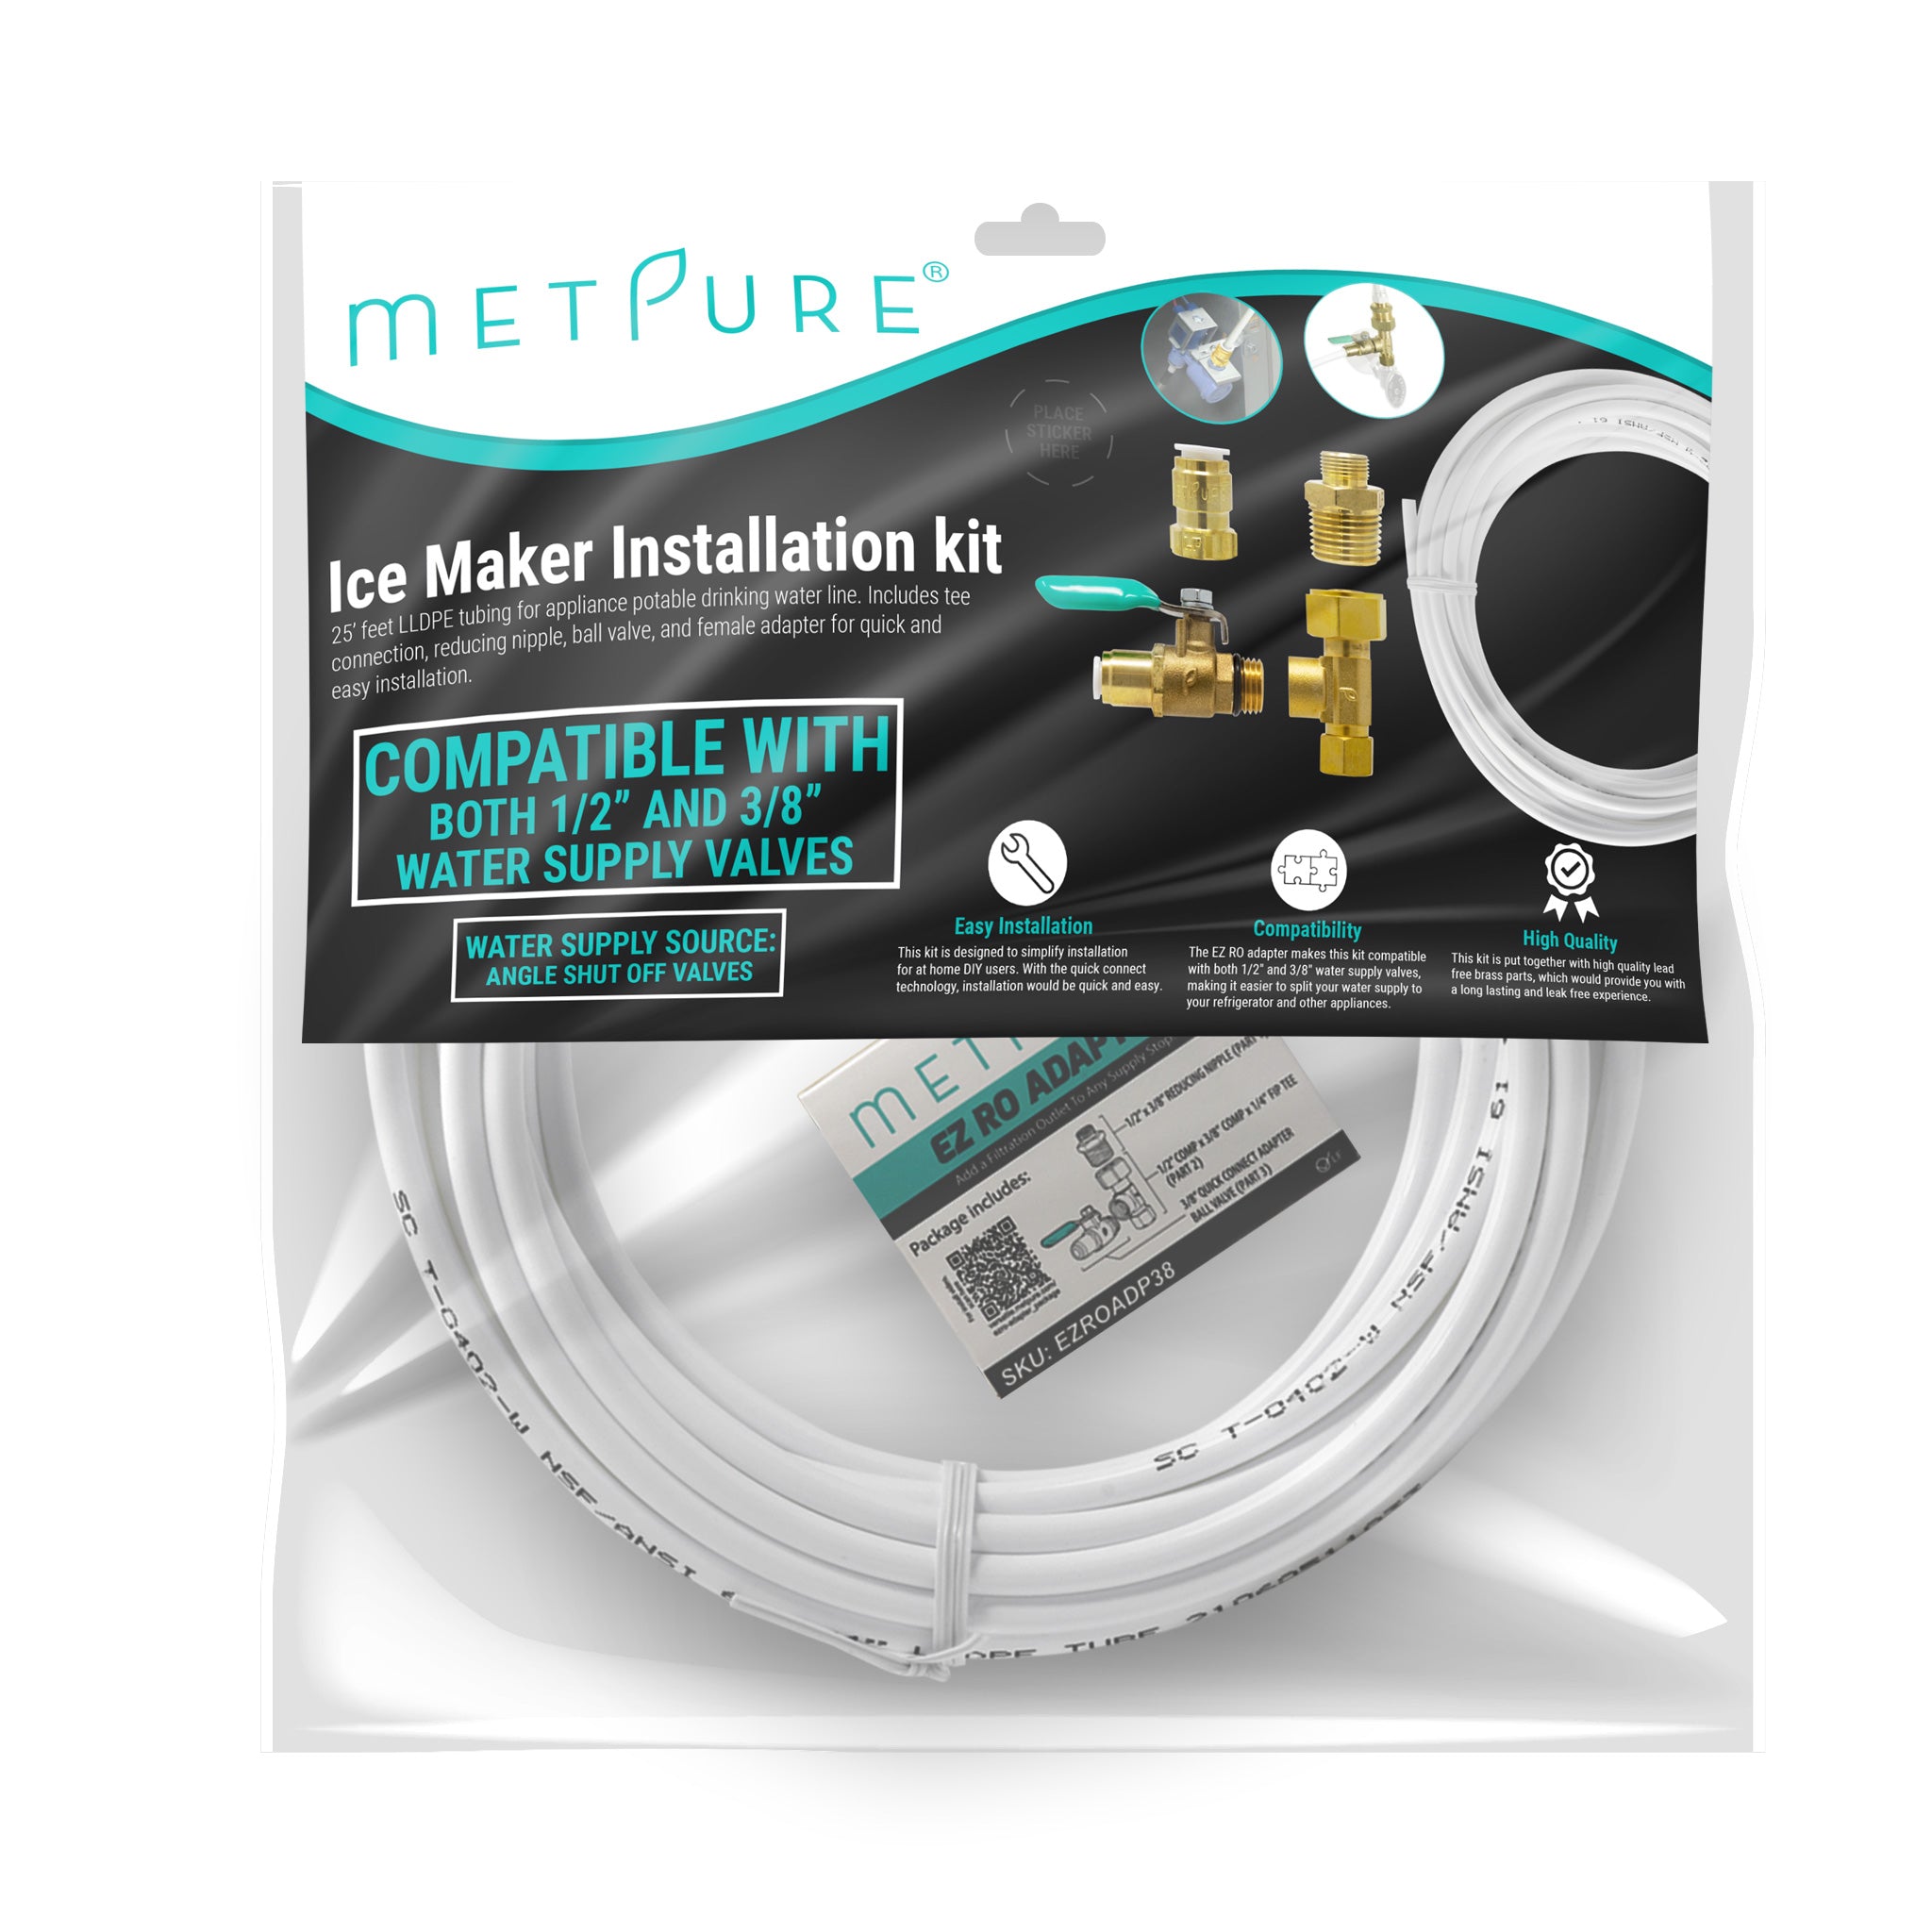 Metpure Ice Maker Fridge Installation Kit - 1/4" Fittings with 1/4" OD 25 Feet White Tubing for Potable Drinking Water